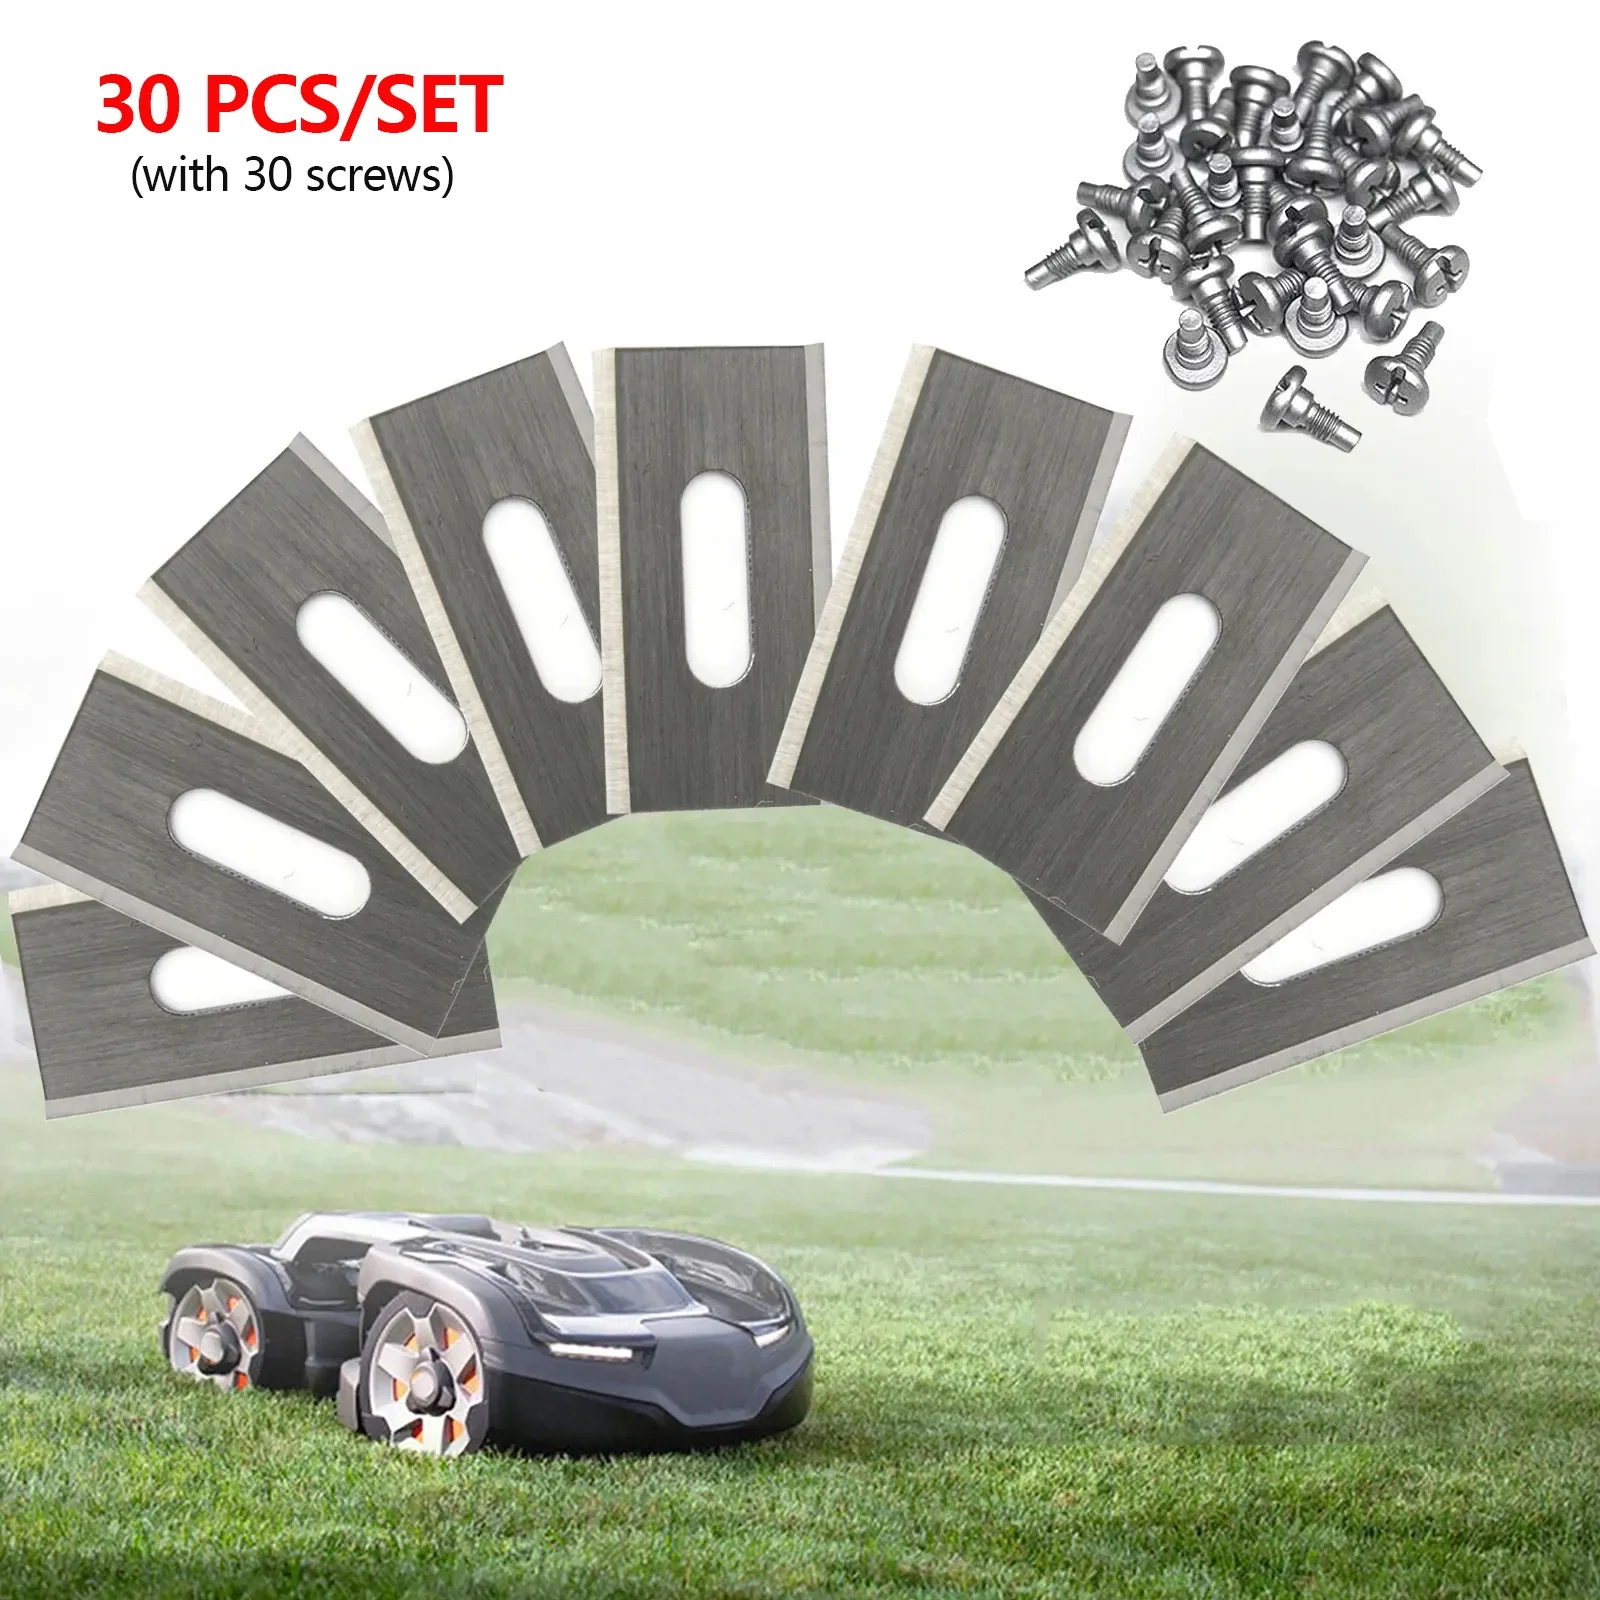 

30pcs Grass Trimmer Blades Lawn Mower Replacement Stainless Steel Cutter Piece for Automower Garden Robotic Lawnmower Tools